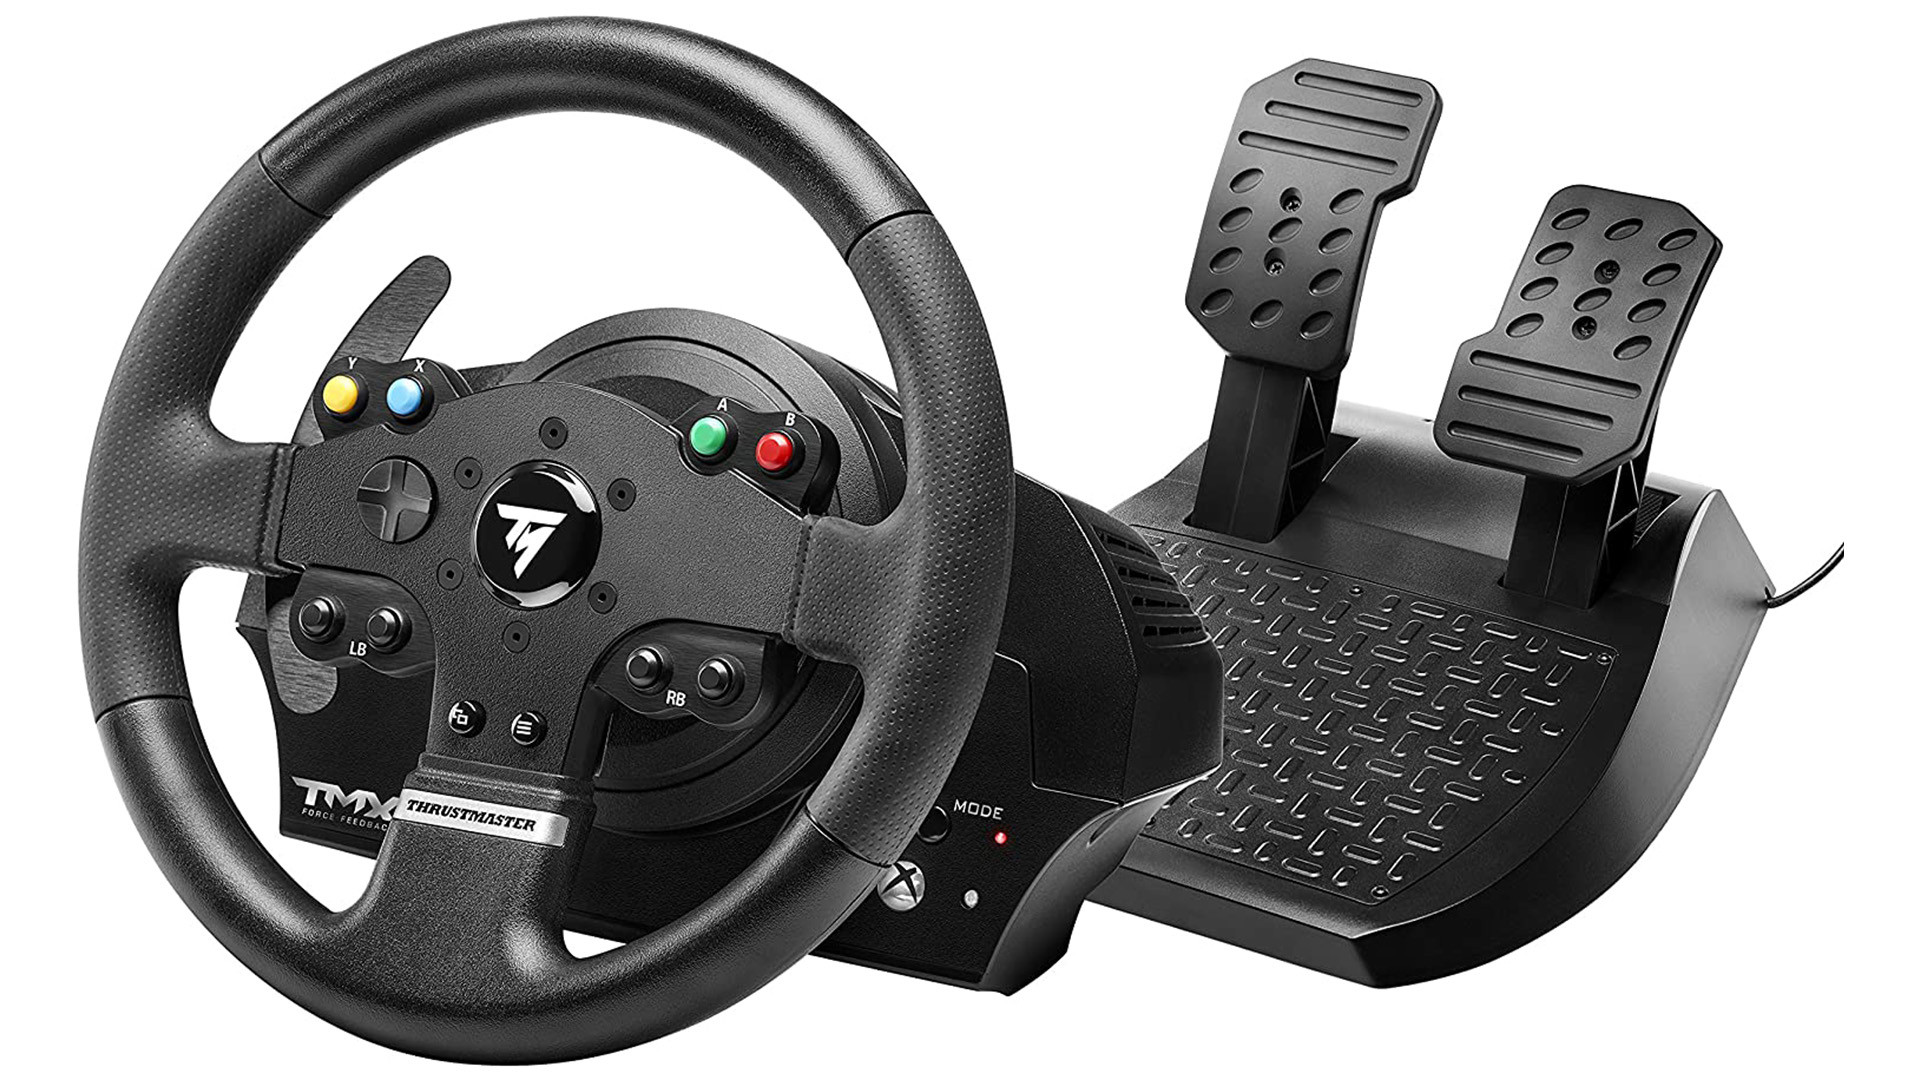 The Thrustmaster TMX racing wheel against a white background